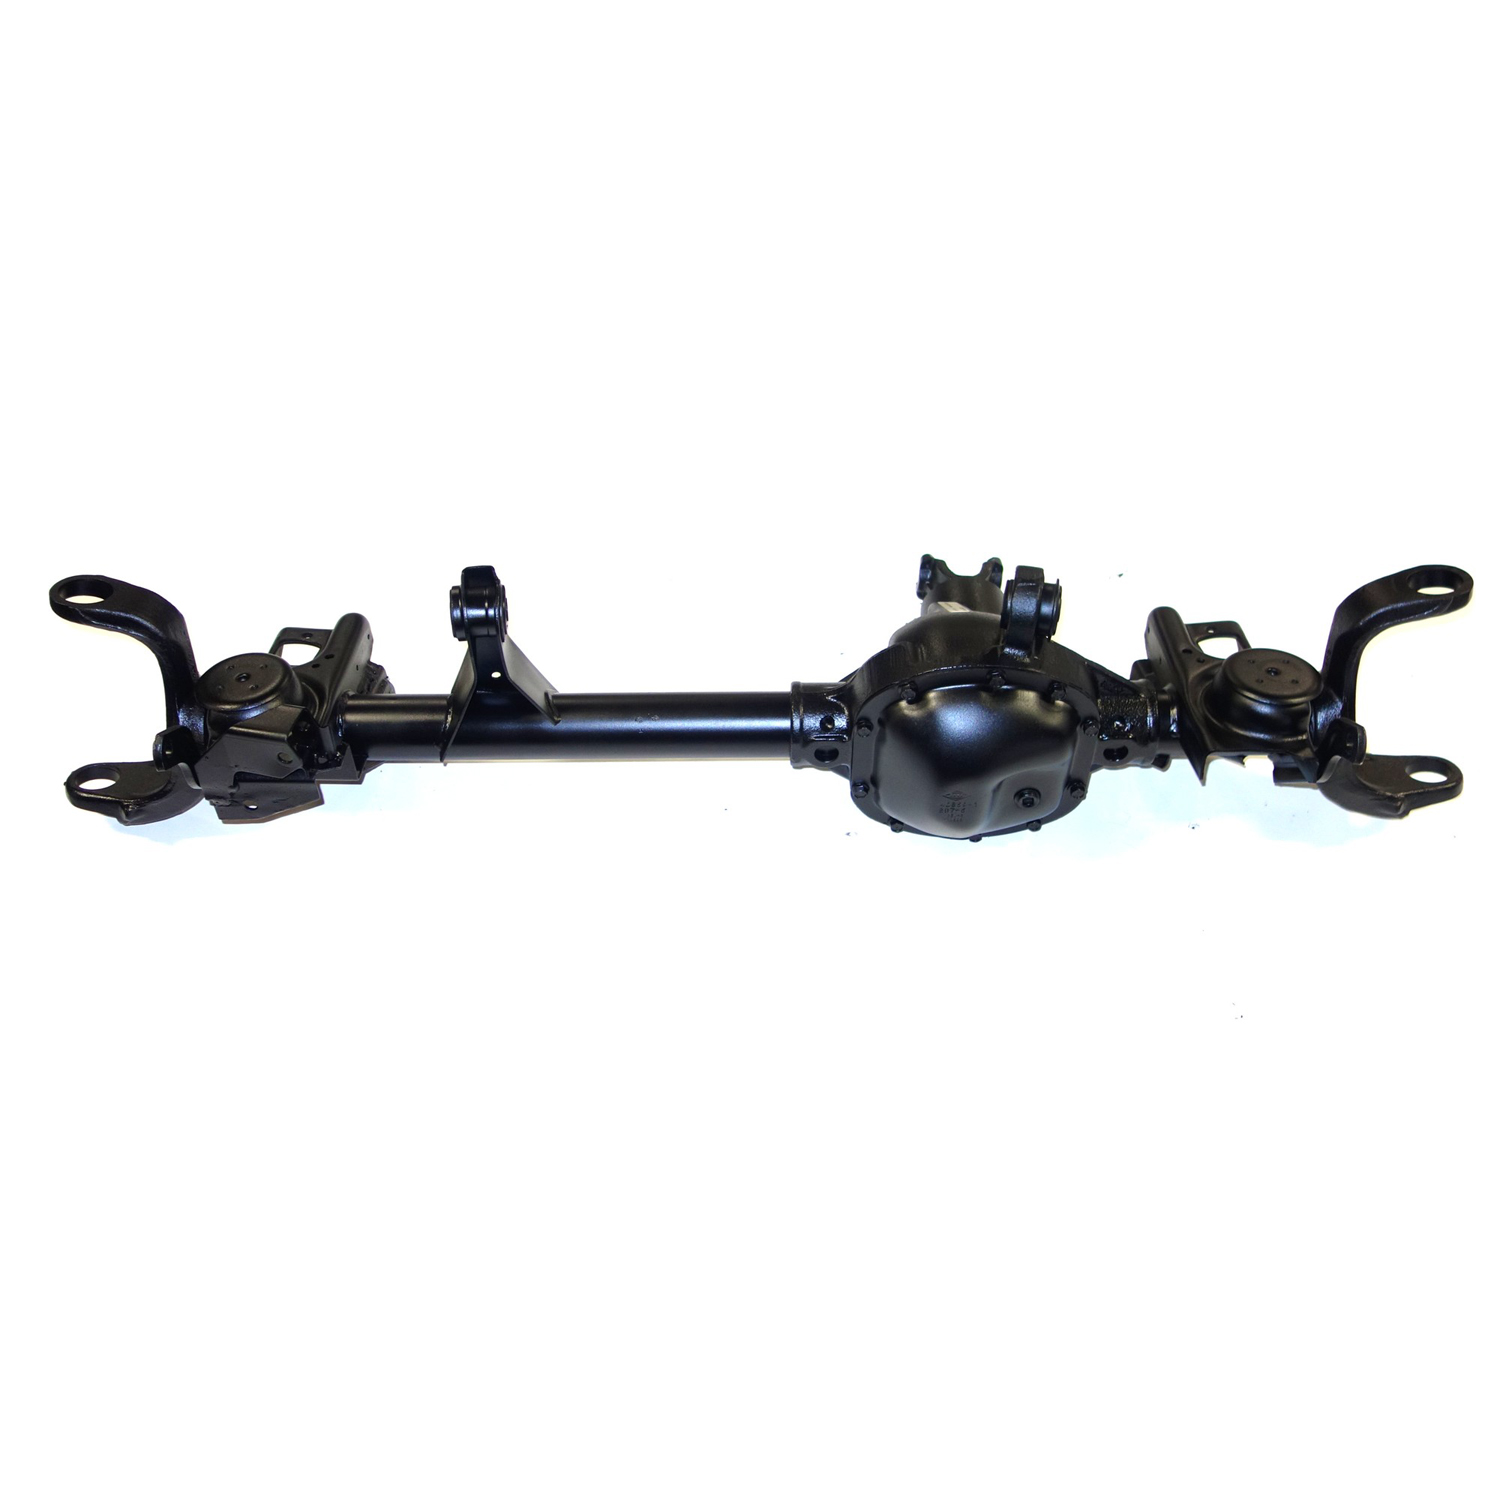 Reman Axle Assembly for Dana 30 90-95 Jeep Wrangler 3.55 Ratio with ABS